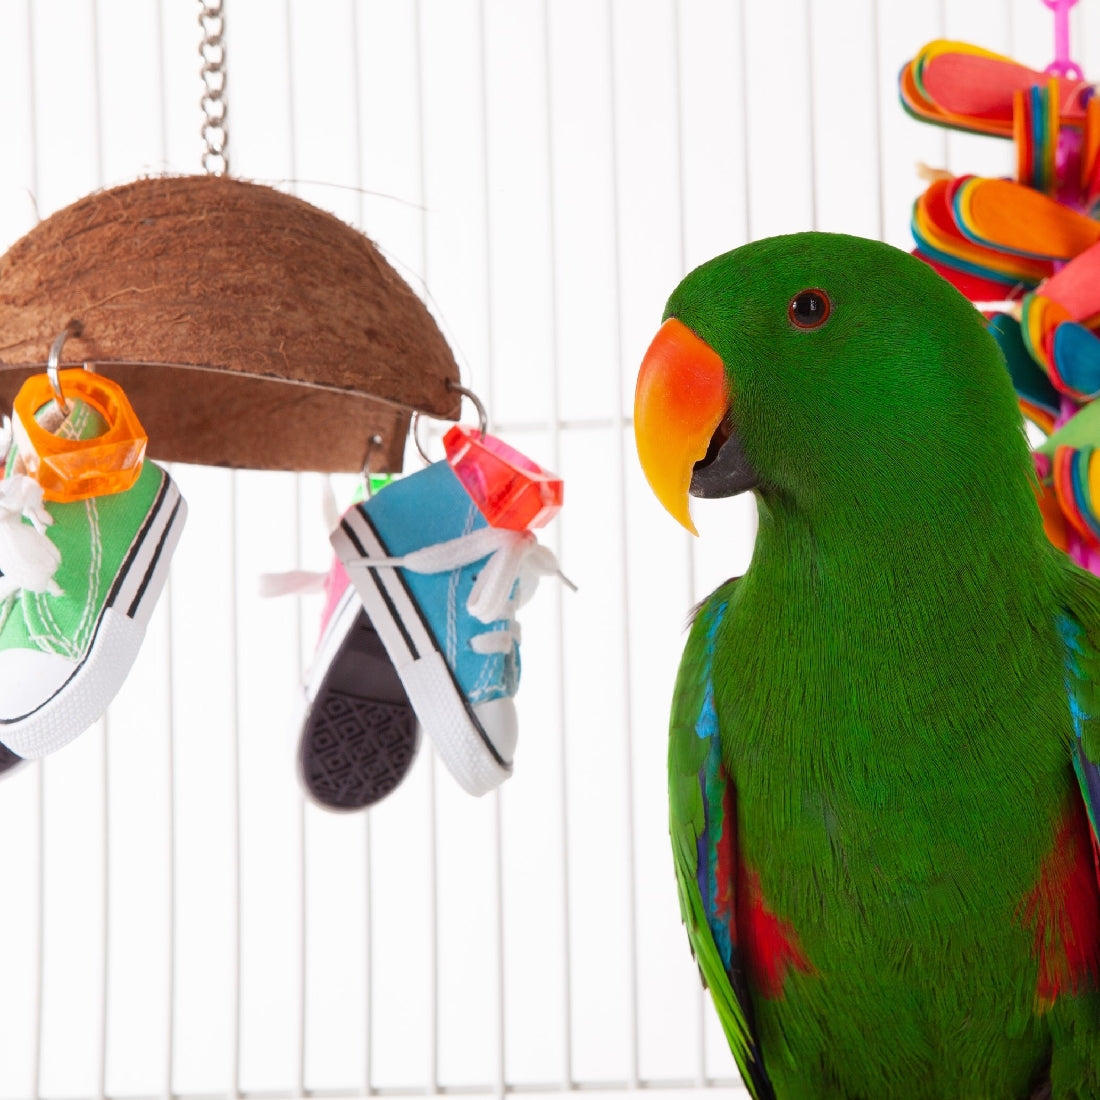 Green parrot near colorful toys inside cage, type: bird toy.